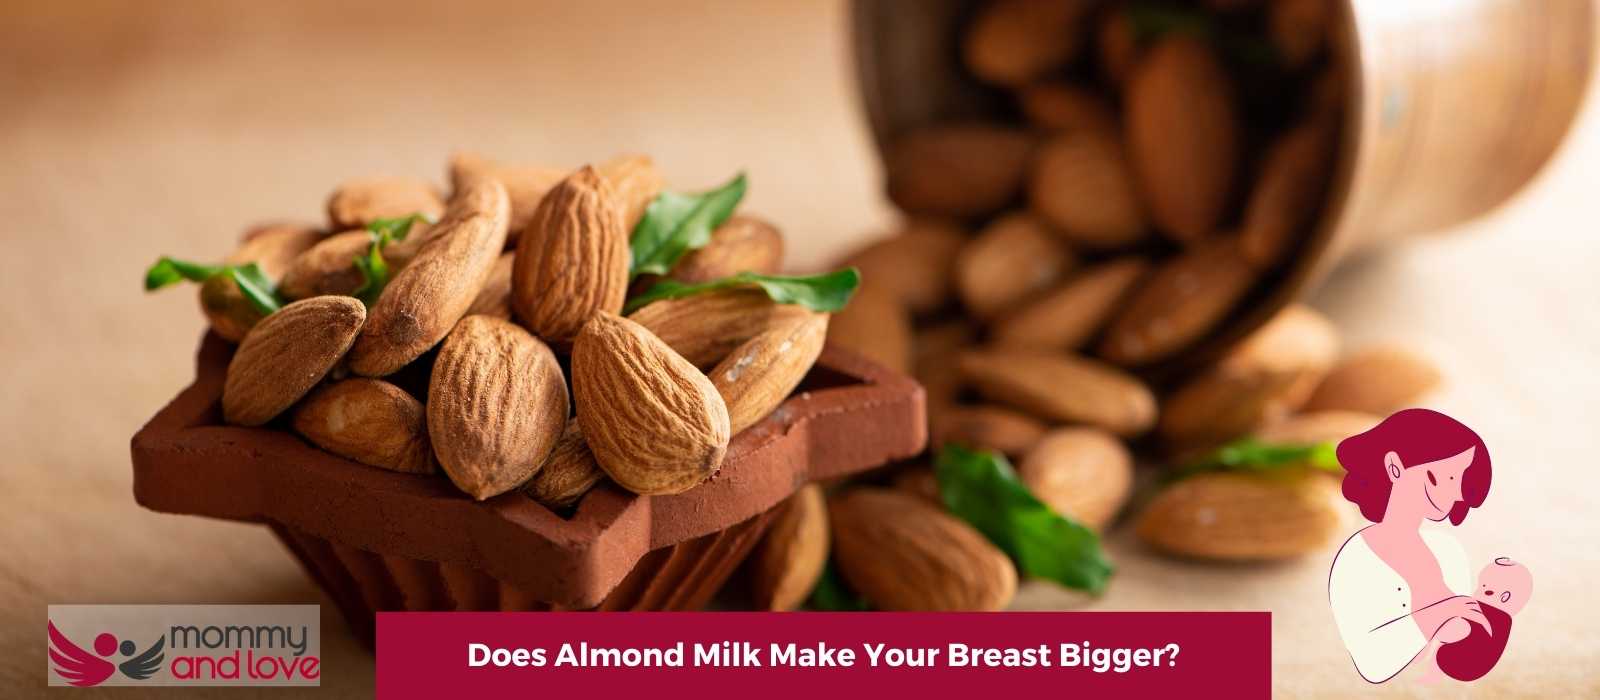 Does Almond Milk Make Your Breast Bigger